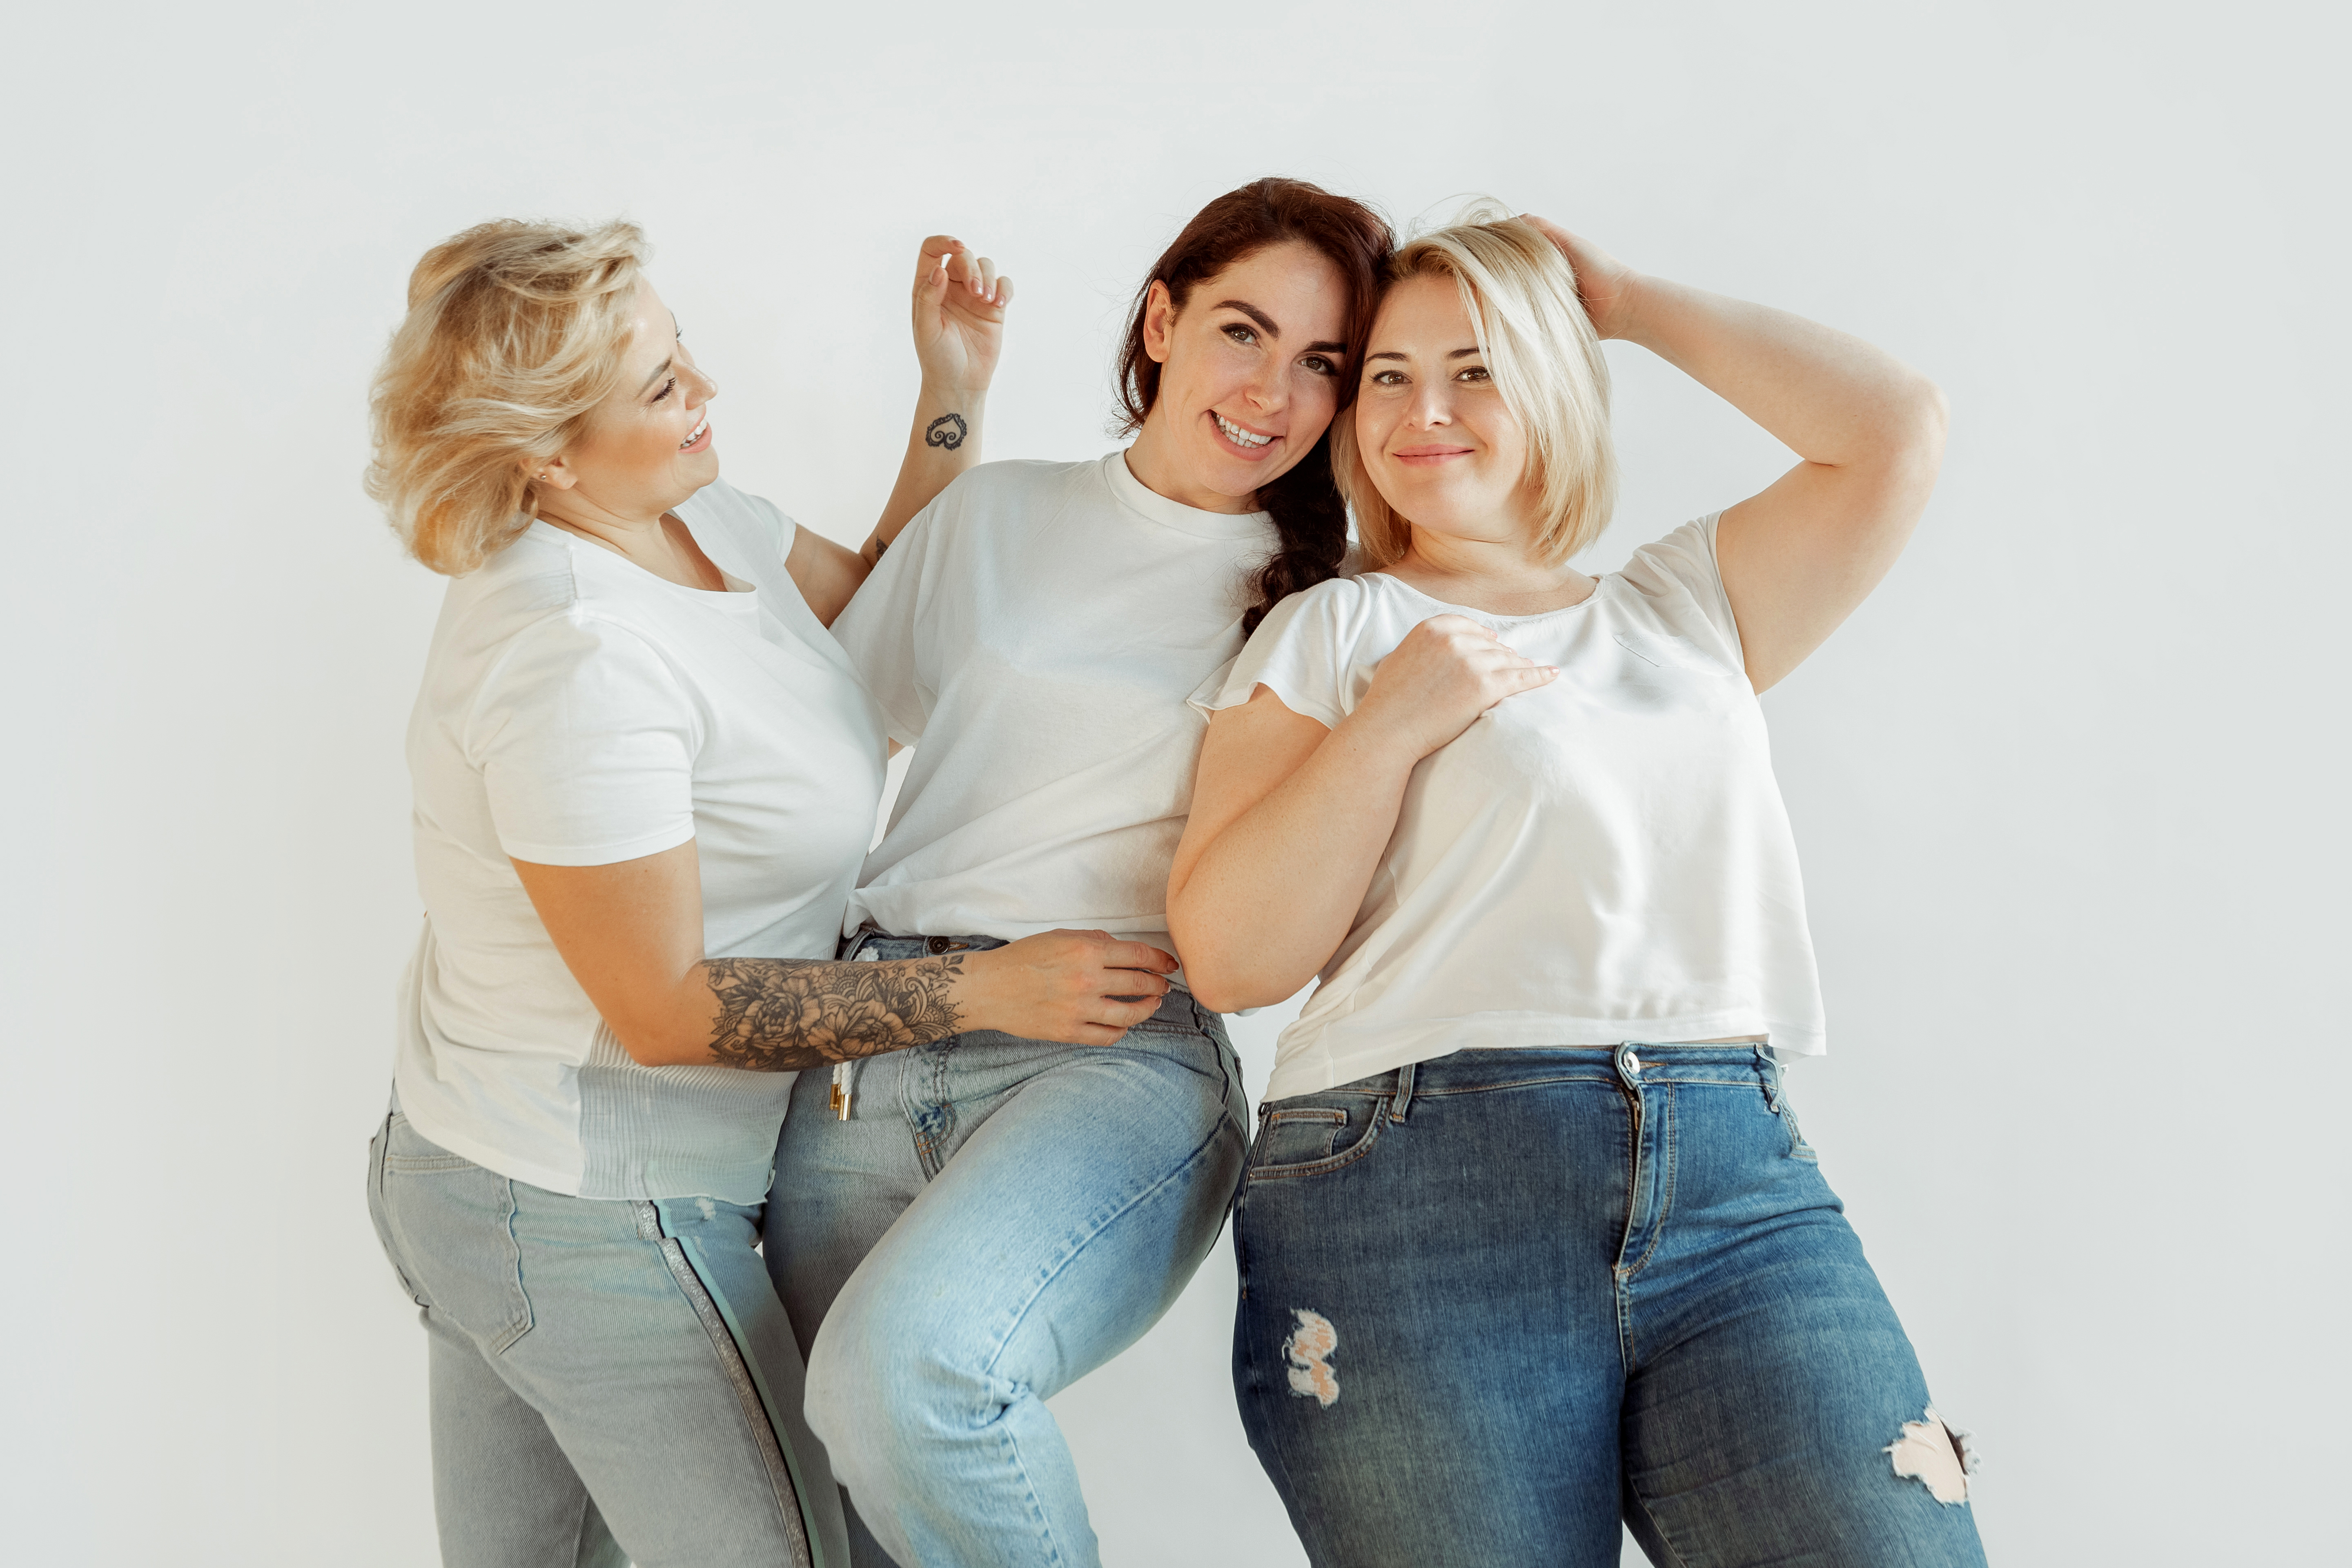 Confidence. Young caucasian women in casual clothes having fun together. Friends posing on white background, laughting, looks happy, well-kept. Bodypositive, feminism, loving themself, beauty concept.